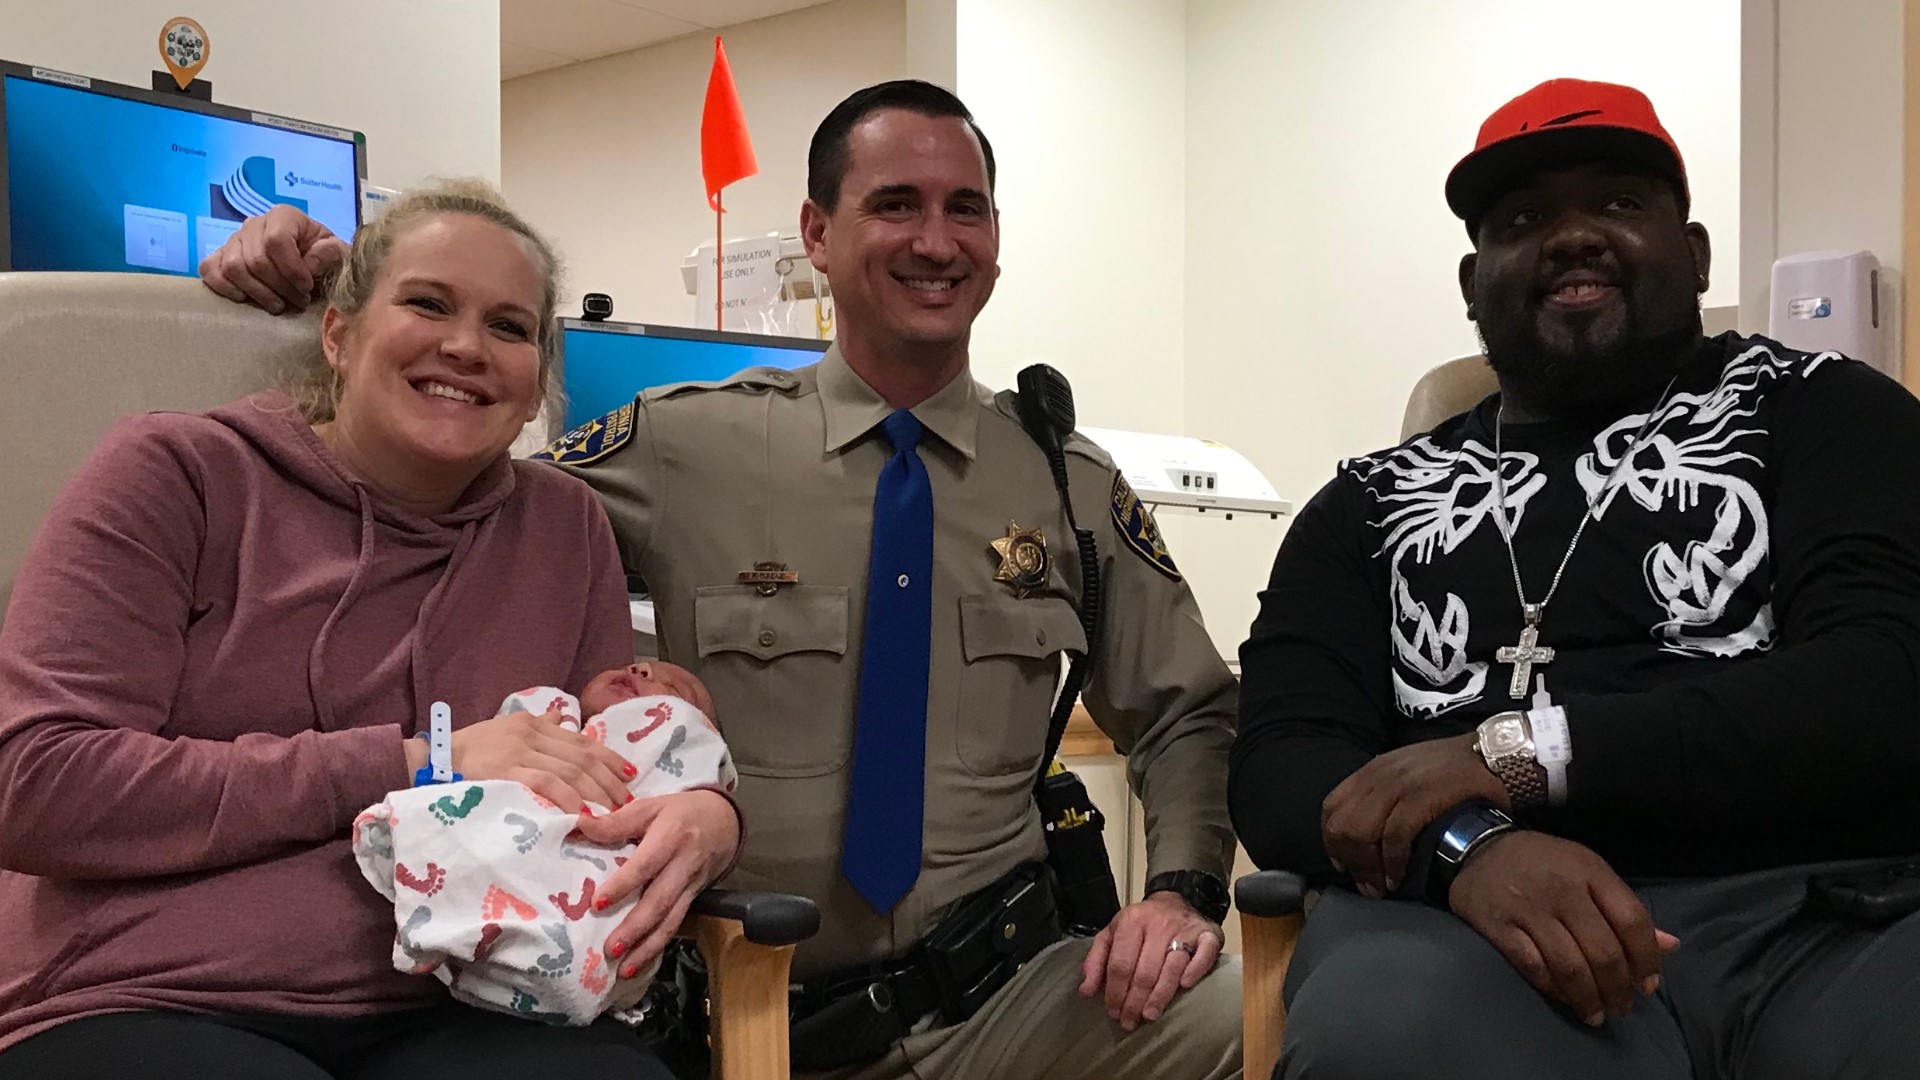 Tiffana Lemaster went into active labor and gave birth to the boy right there, just as California Highway Patrol (CHP) Officer Phil Dibene arrived. However, the baby wasn't breathing.